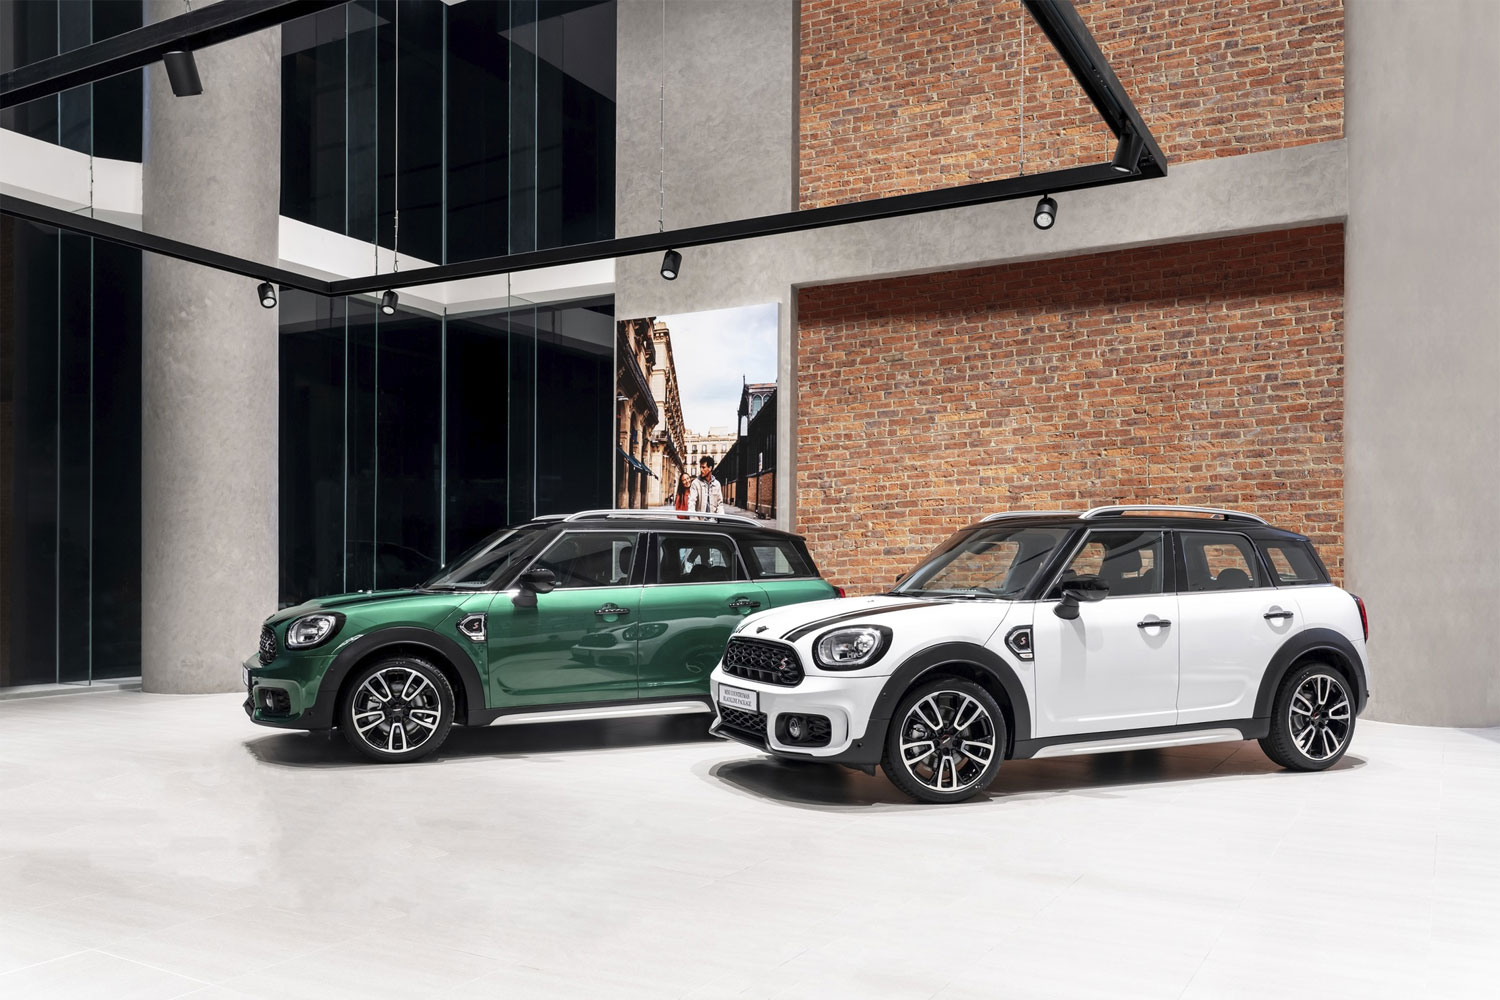 Two MINI Cooper S Countryman Sports Limited Edition Variants Now Available in Malaysia